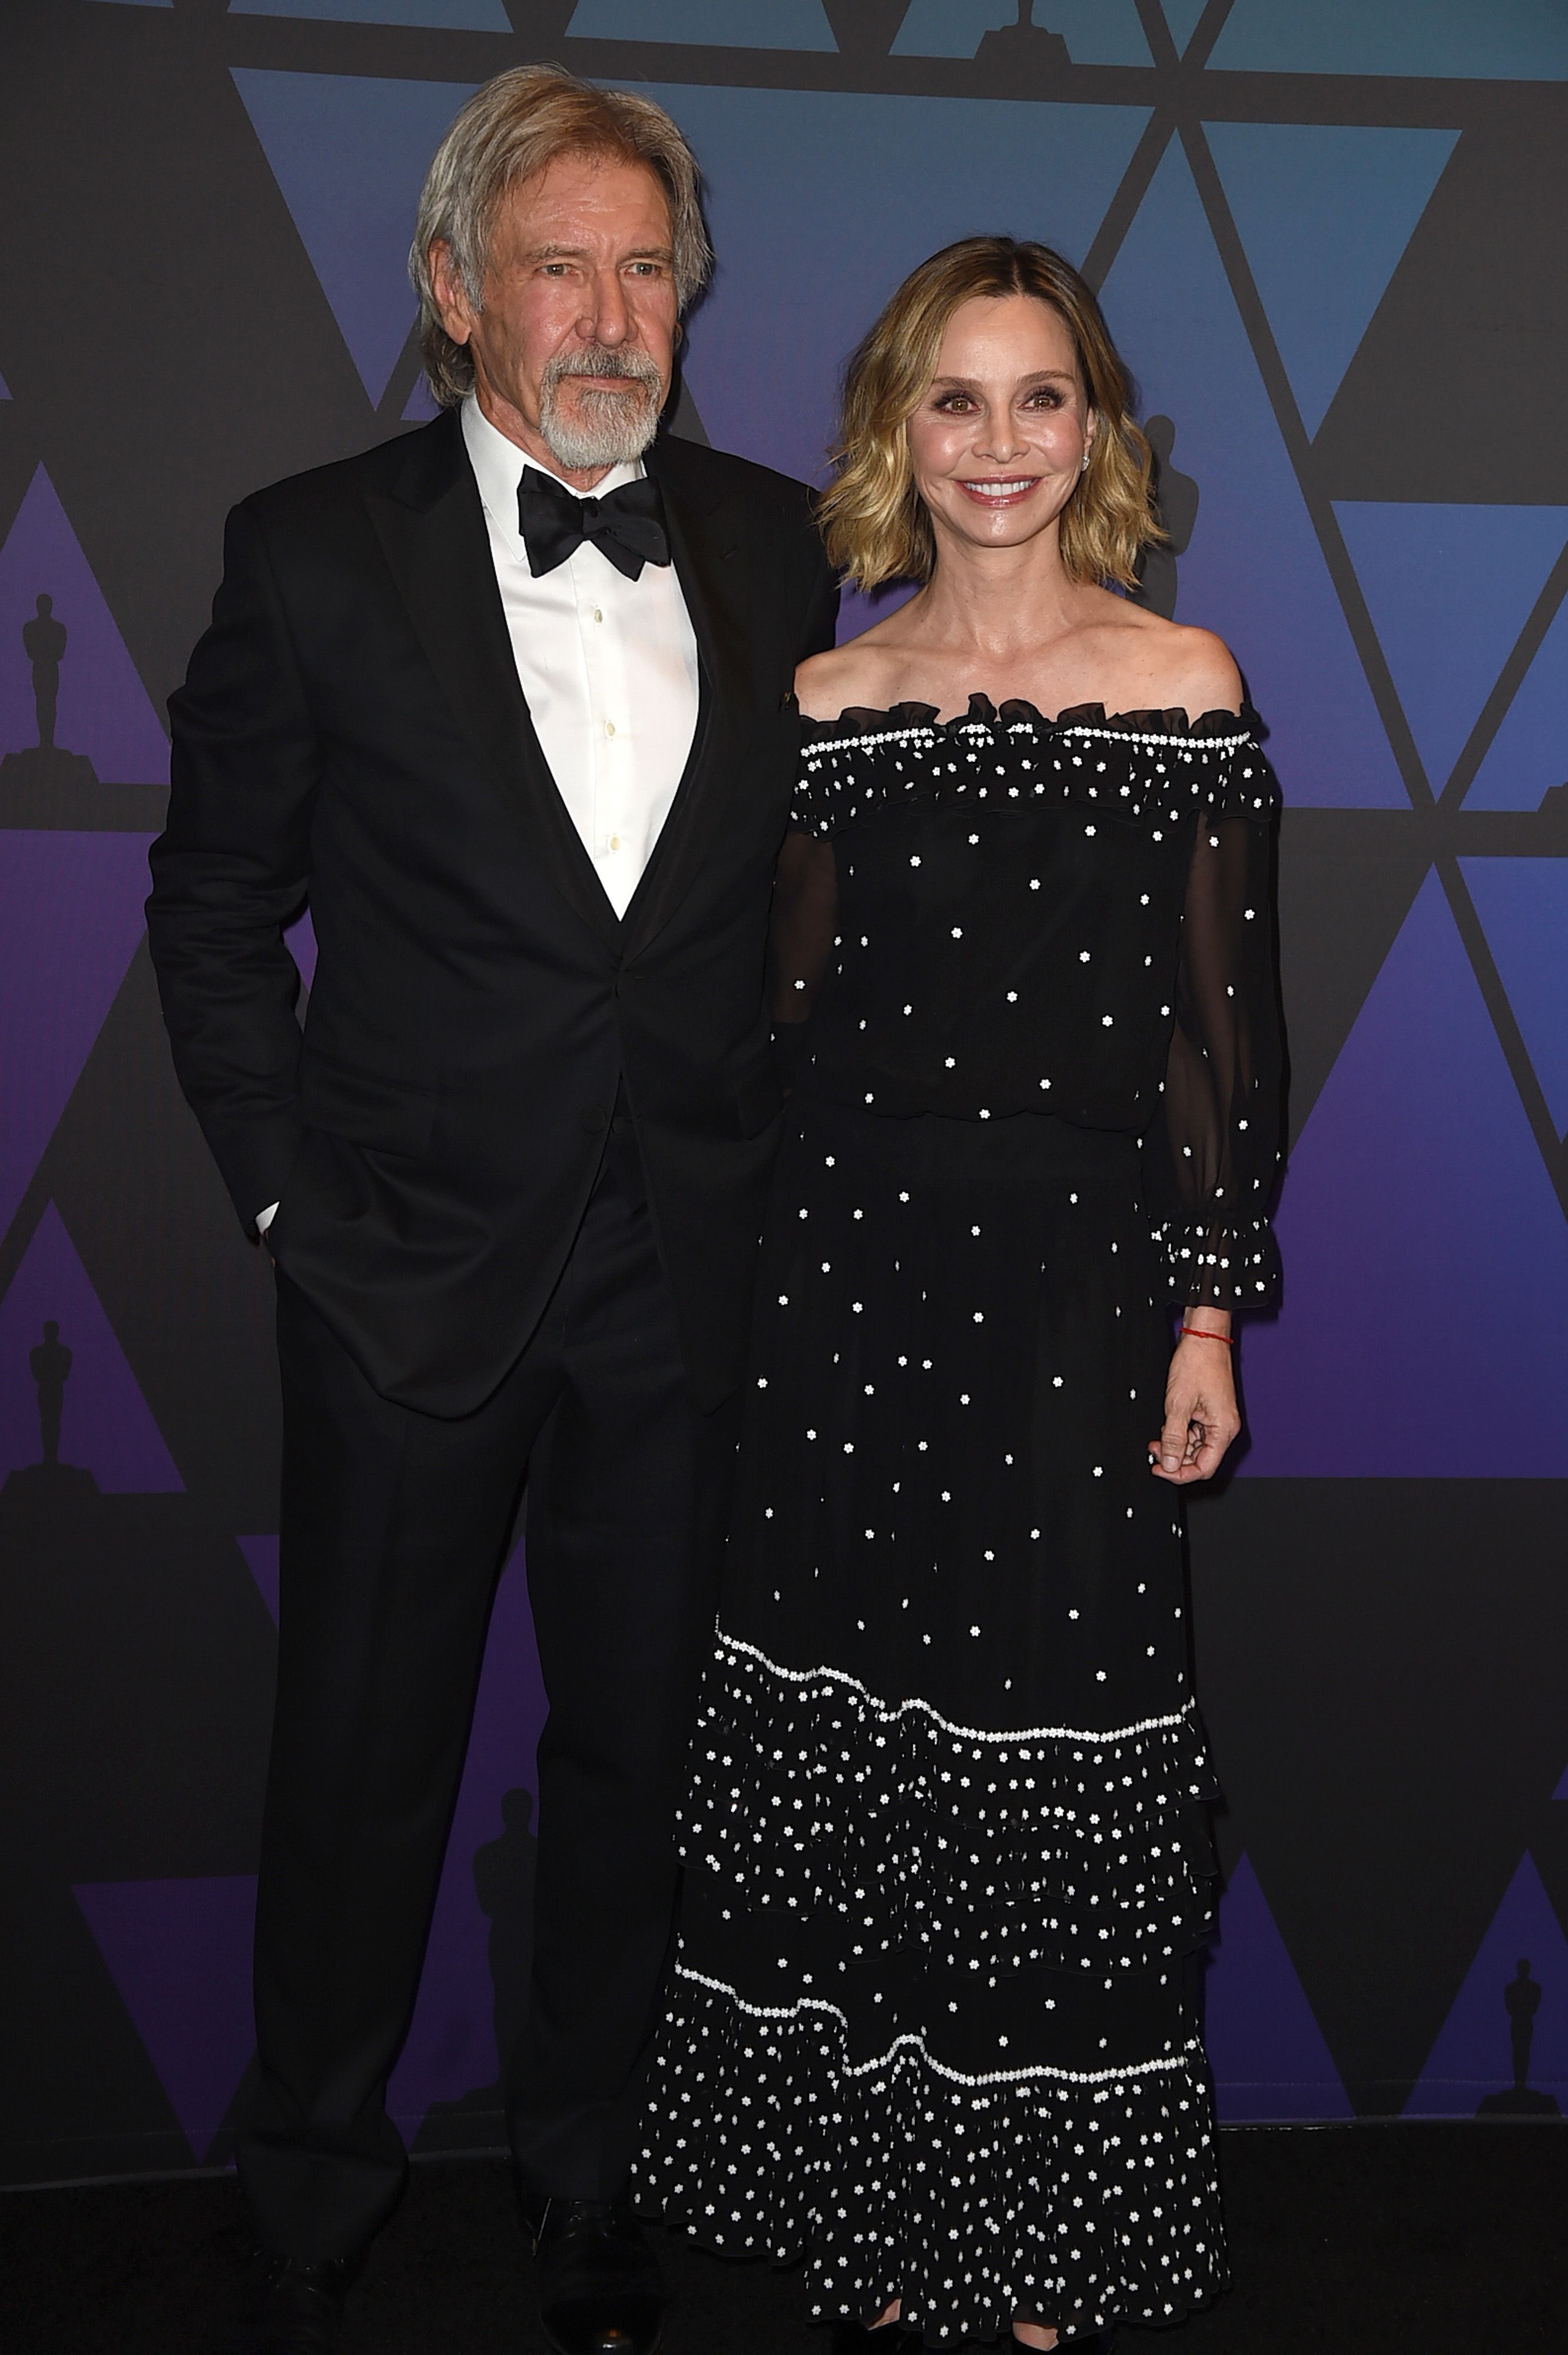 Harrison Ford stands beside wife Calista Flockhart in a black and white polka dot dress.